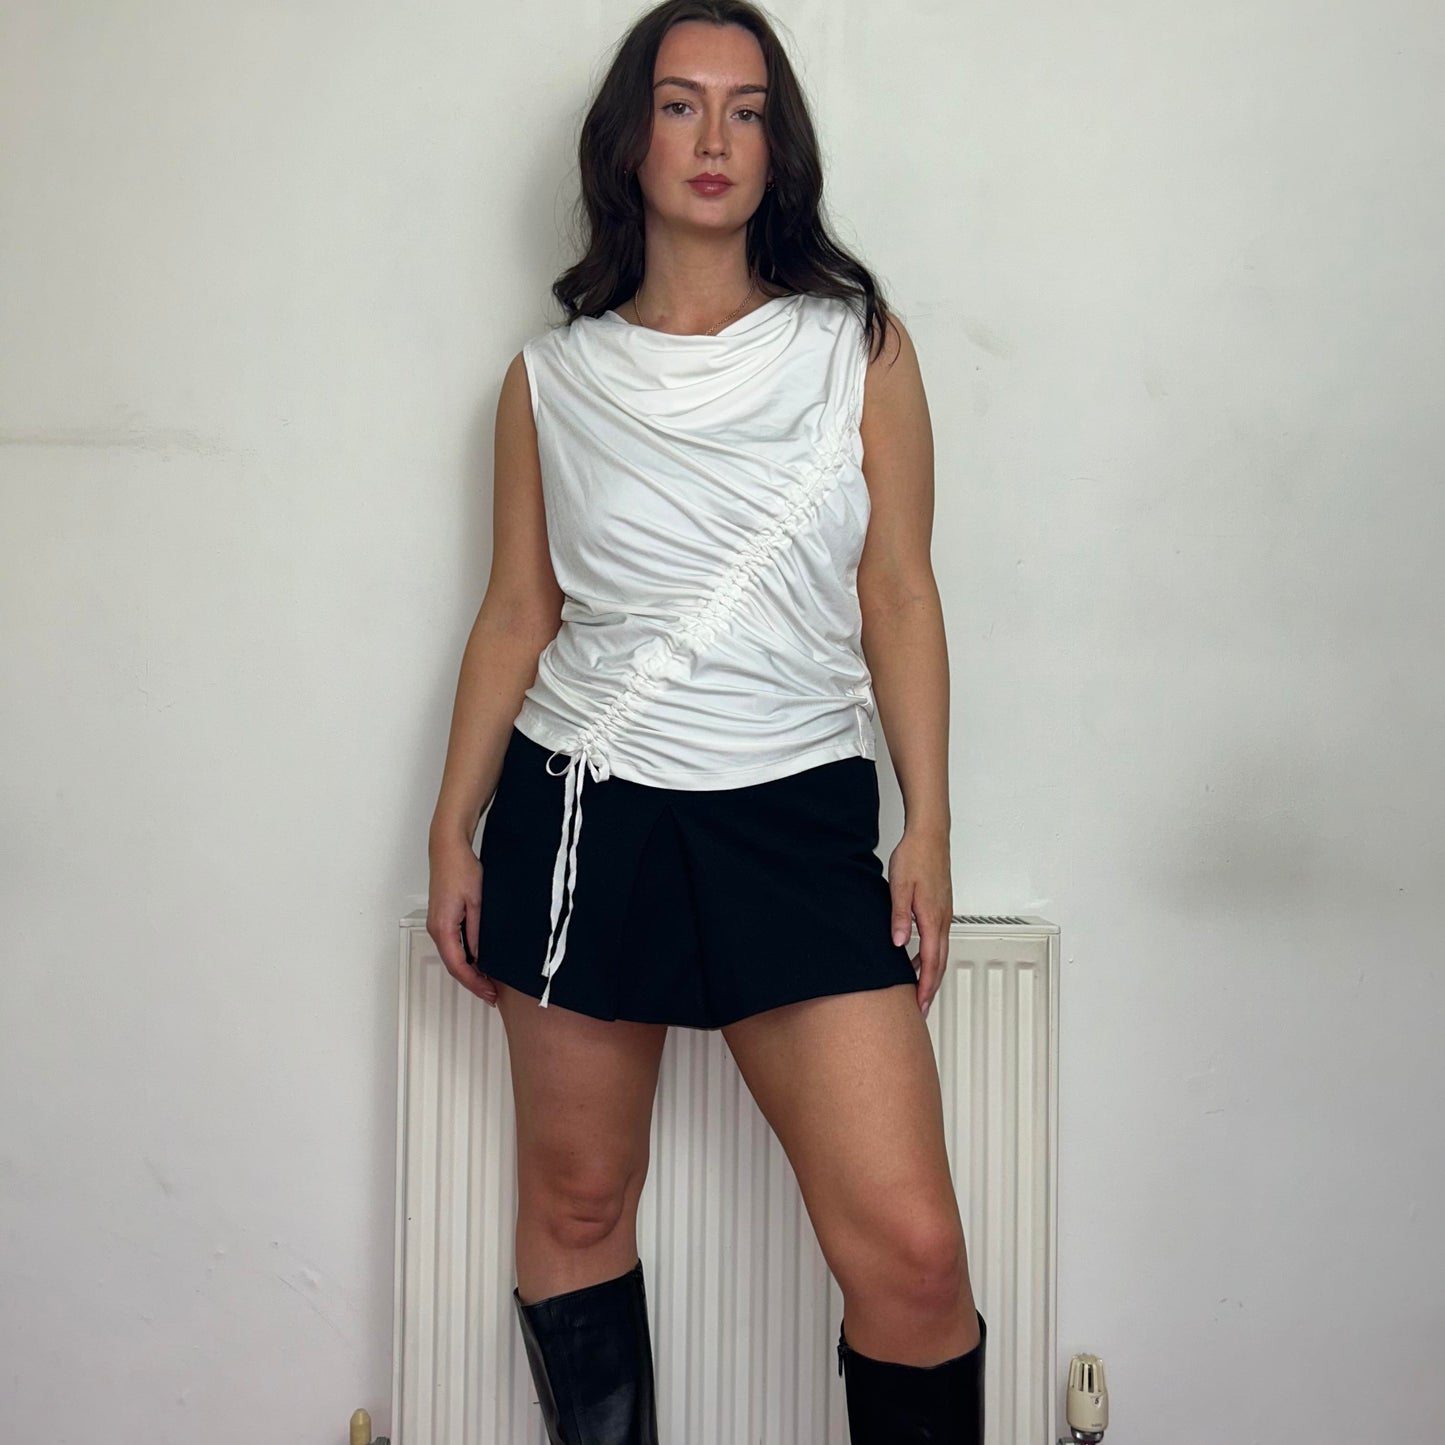 white rouched vintage top shown on a model wearing a black mini skirt and black boots